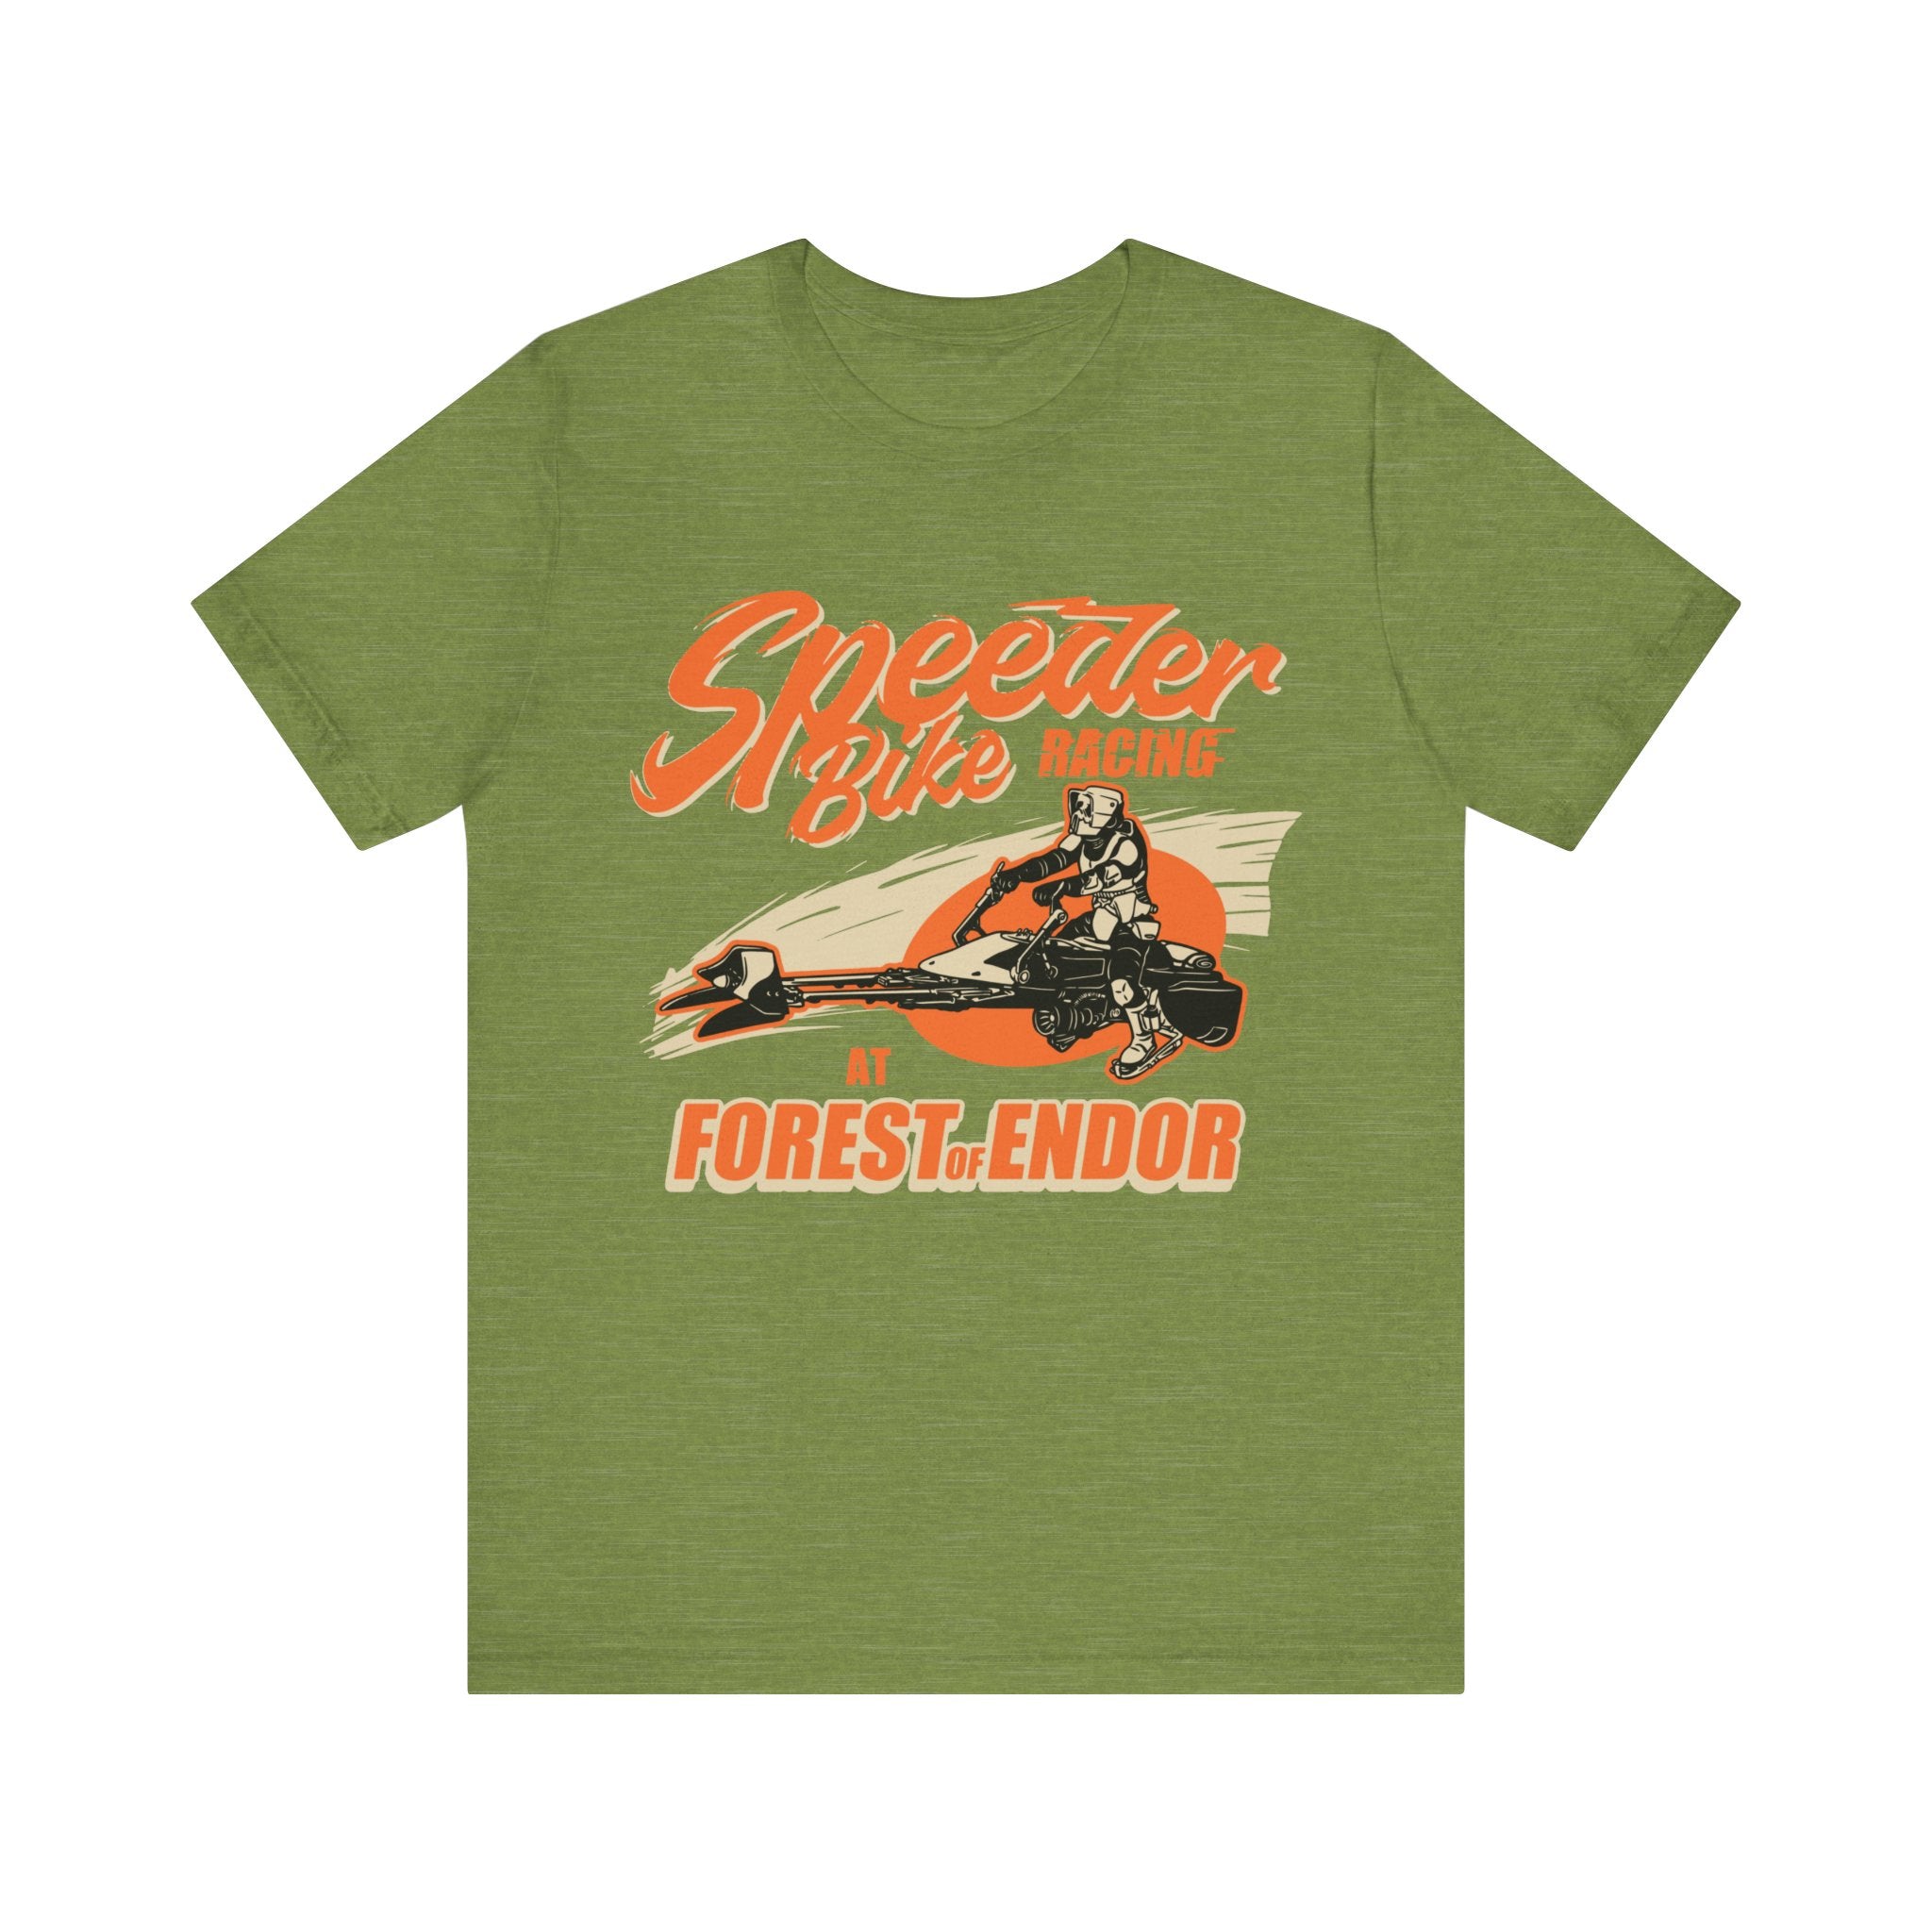 Green jersey tee featuring a vintage-style graphic of Speeder Bike Racing at Forest Endor.